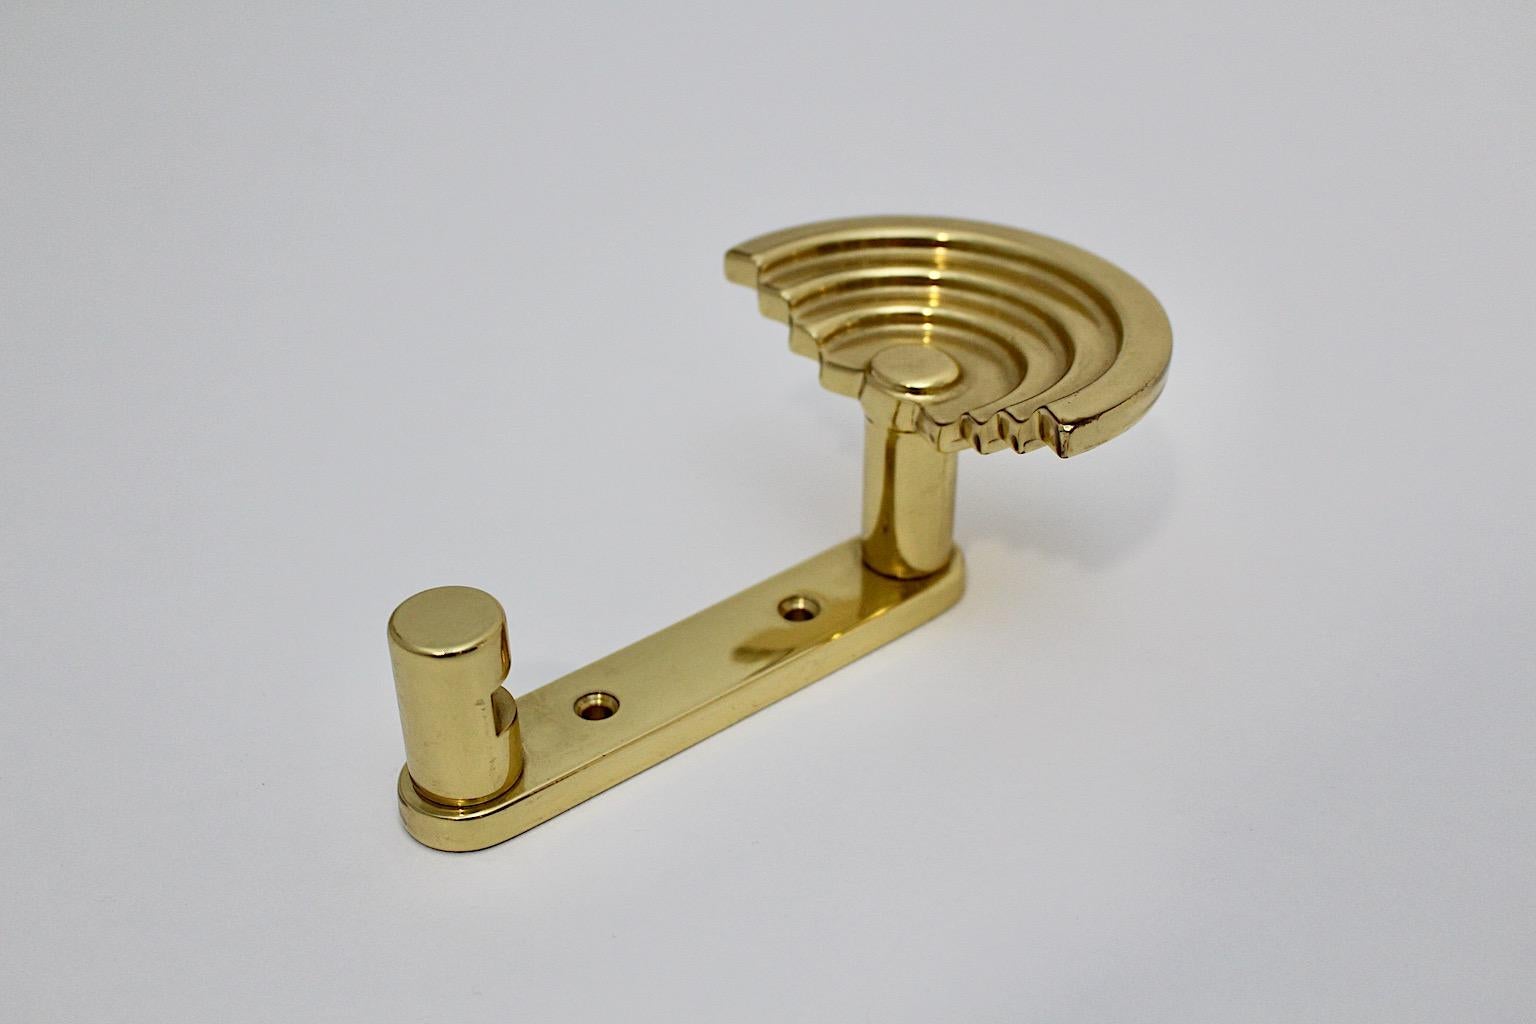 Post Modern vintage coat hook from brass by Ettore Sottsass SE 314 for Valli & Valli circa 1985 Italy.
A great coat hook from polished brass from the Post Modern period designed by Ettore Sottsass for Valli & Valli circa 1985 Italy.
This coat hook